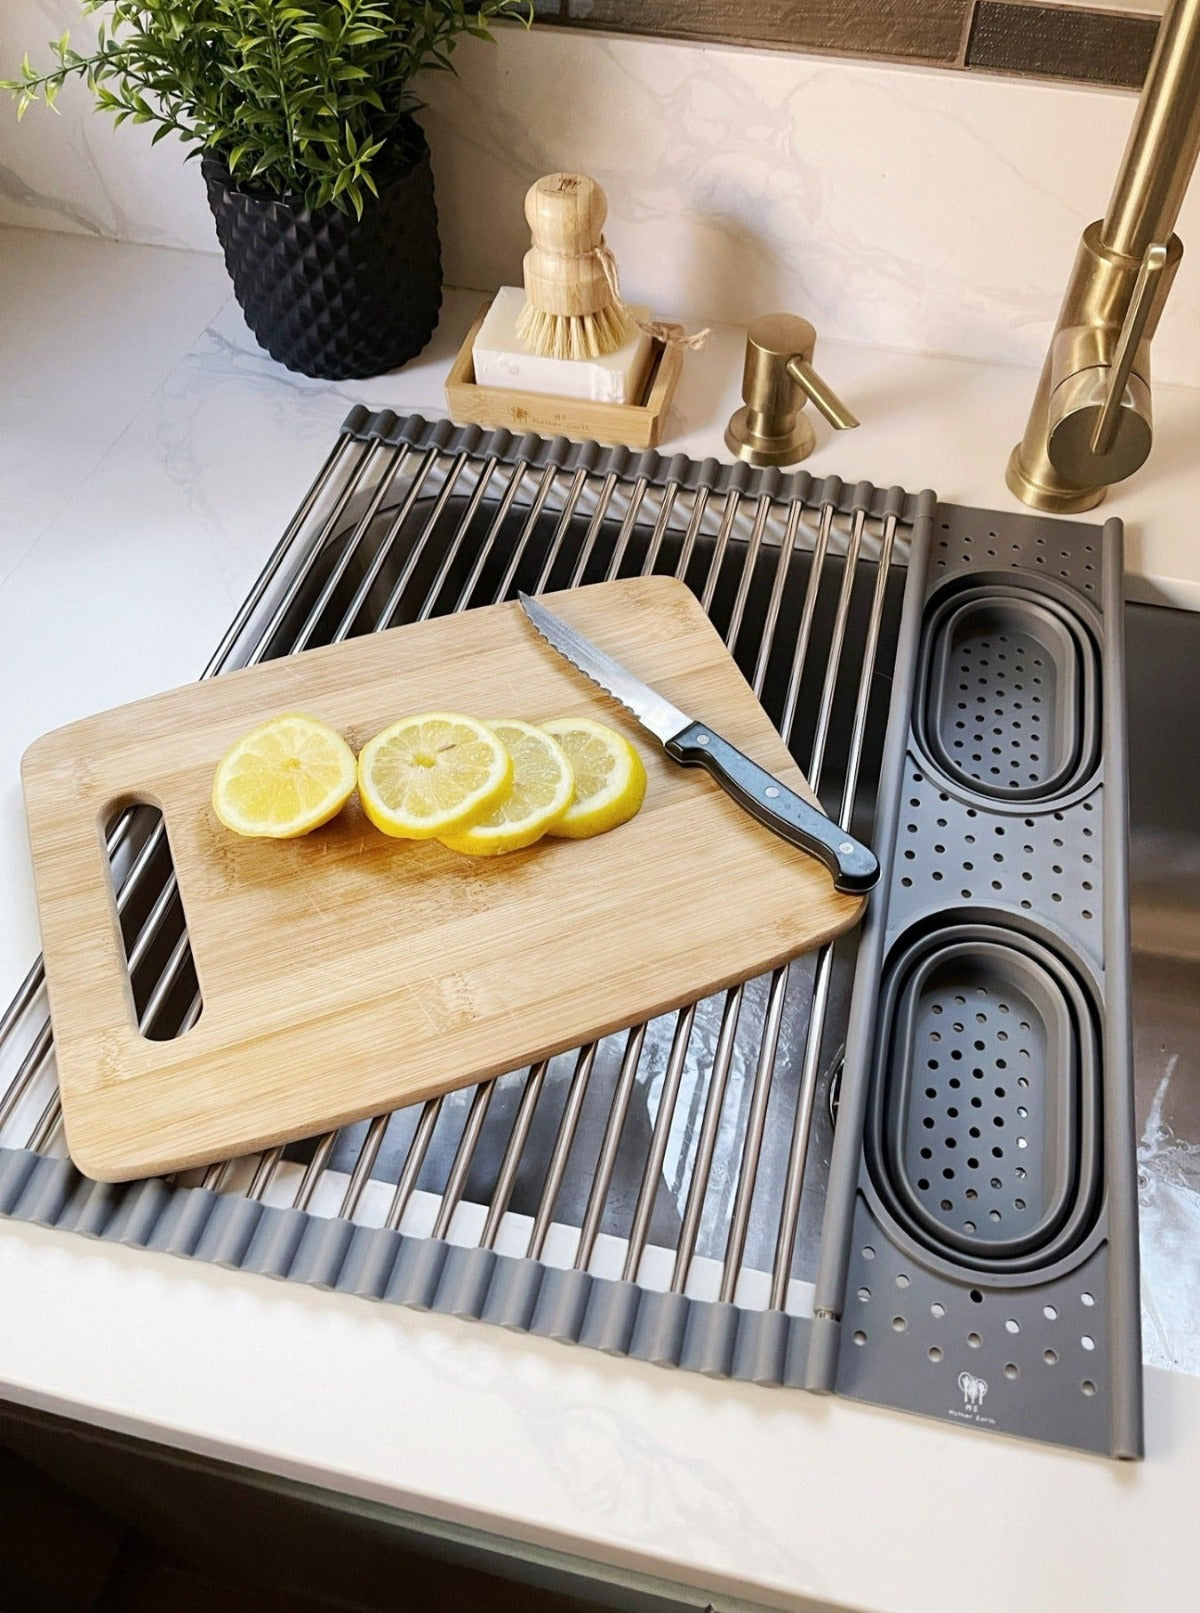 Stainless-steel Roll Up Dish Drying Mat, for easy storage, Dishwasher safe